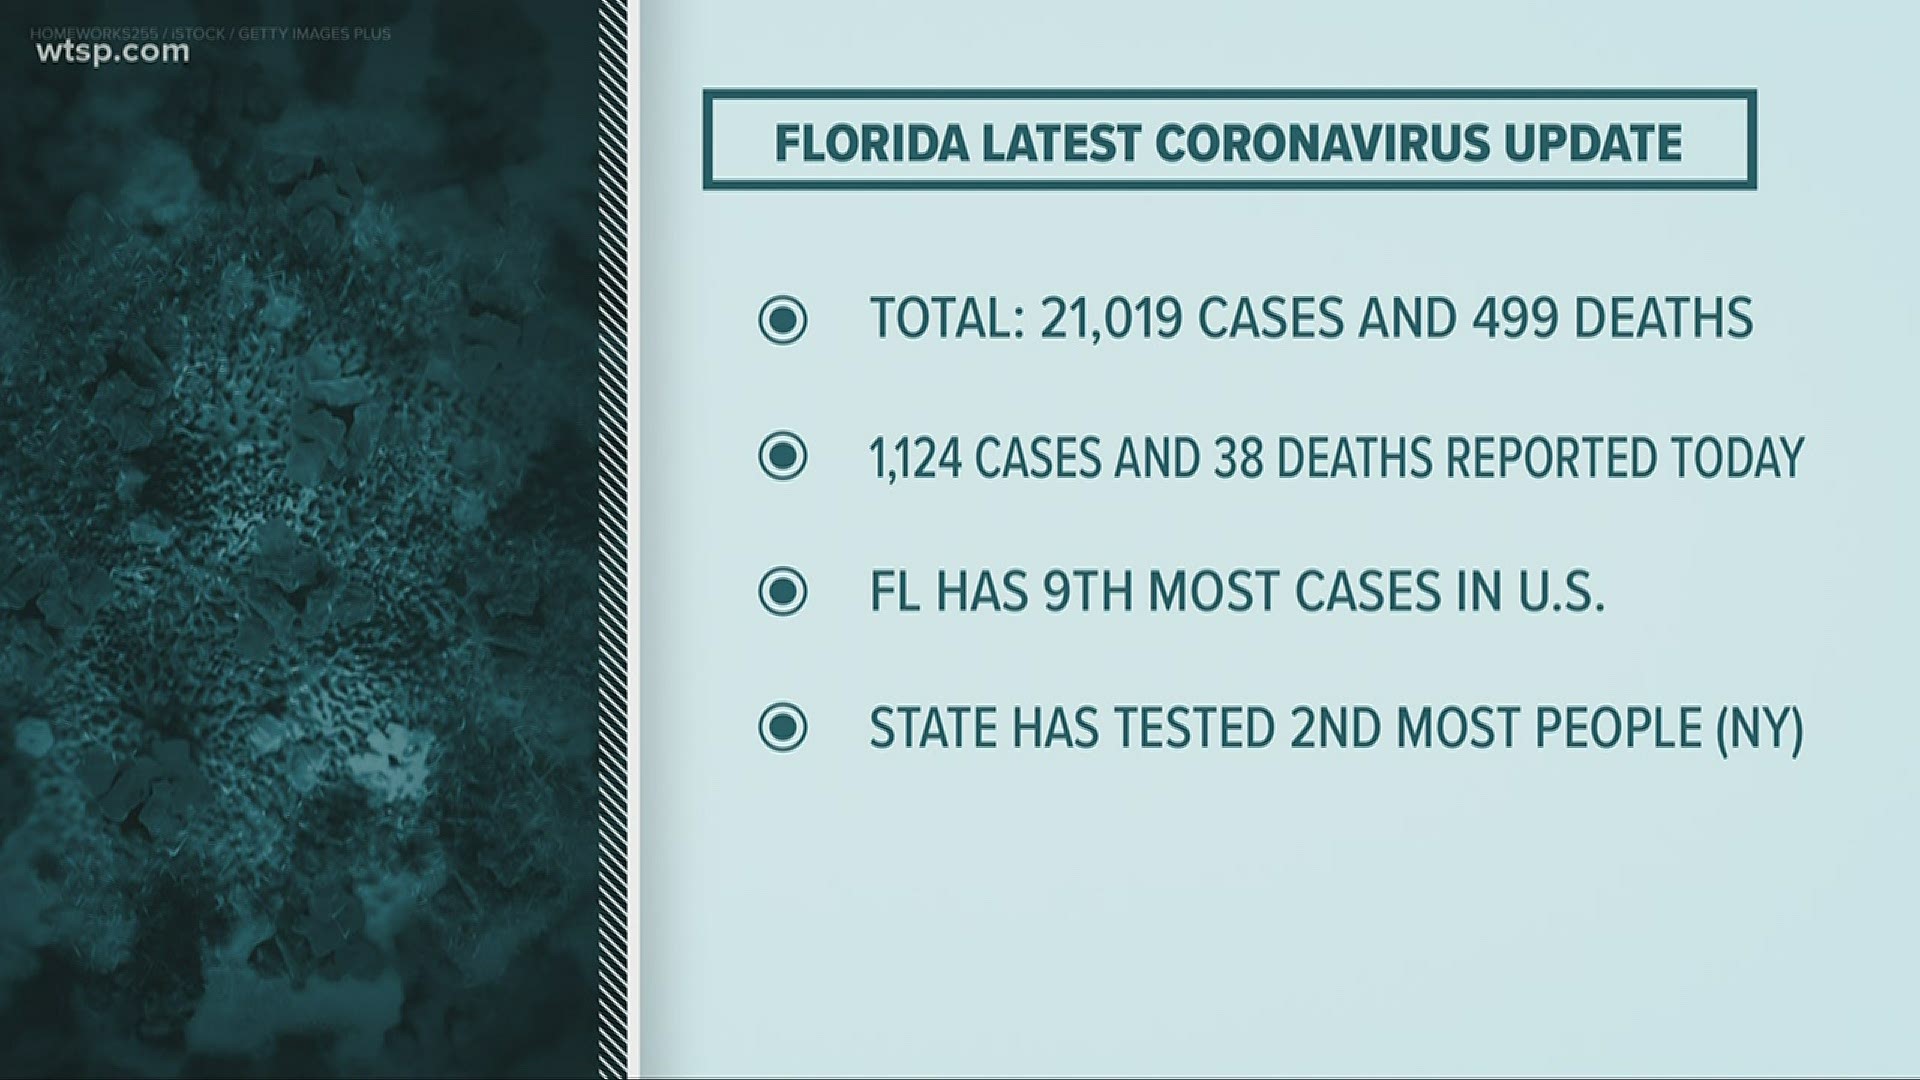 Florida Health reports it is tracking 21,019 positive COVID-19 coronavirus cases and 499 deaths.